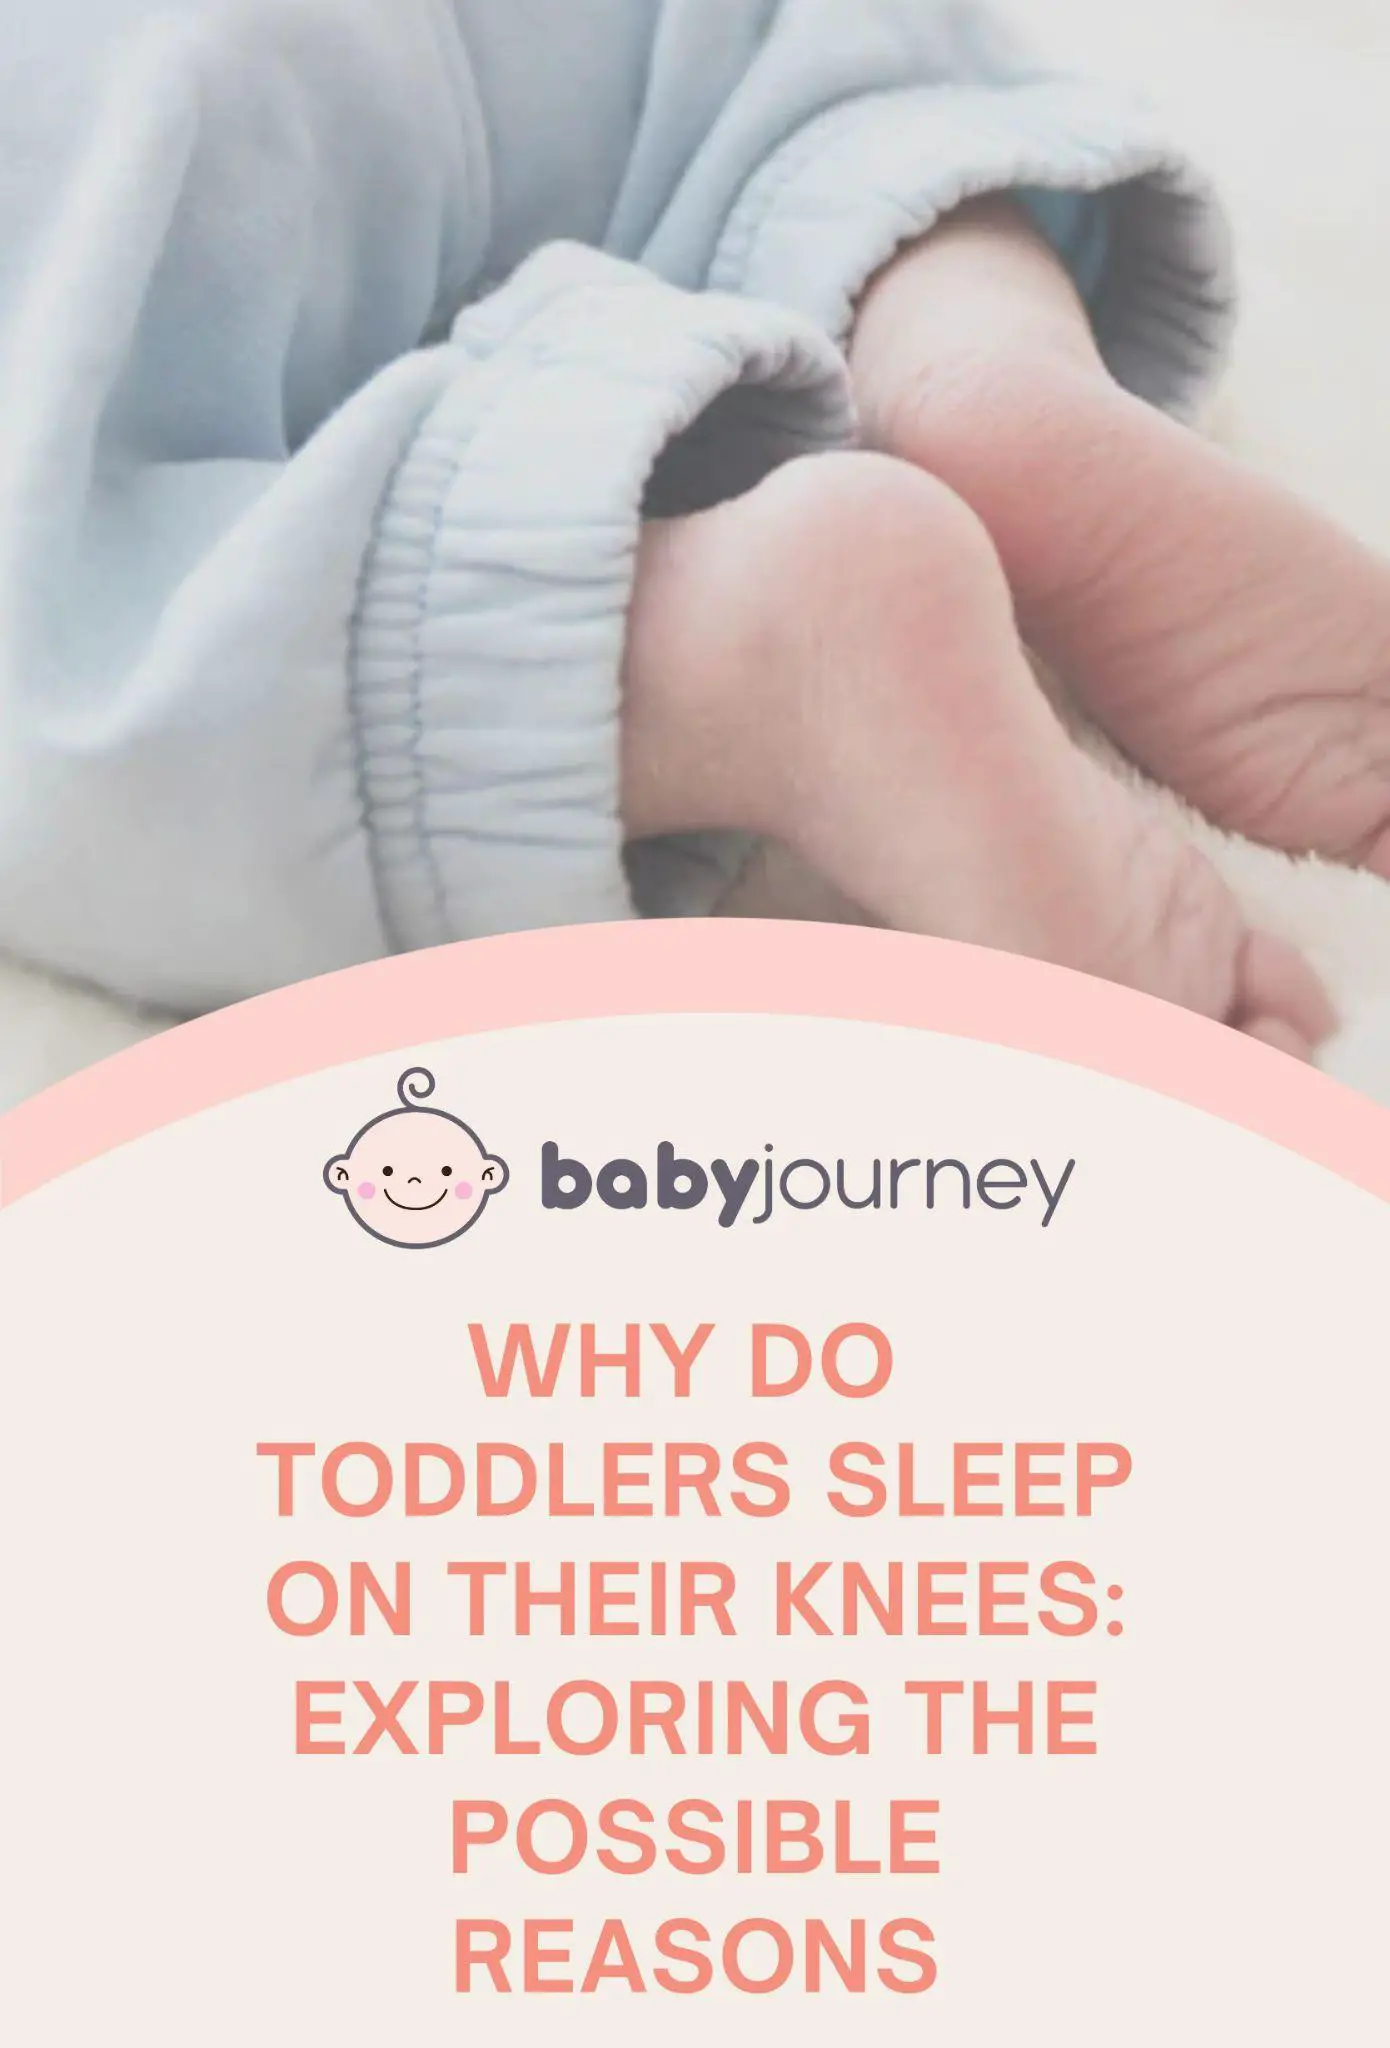 Why Do Toddlers Sleep on Their Knees: Exploring the Possible Reasons Pinterest Image - Baby Journey  